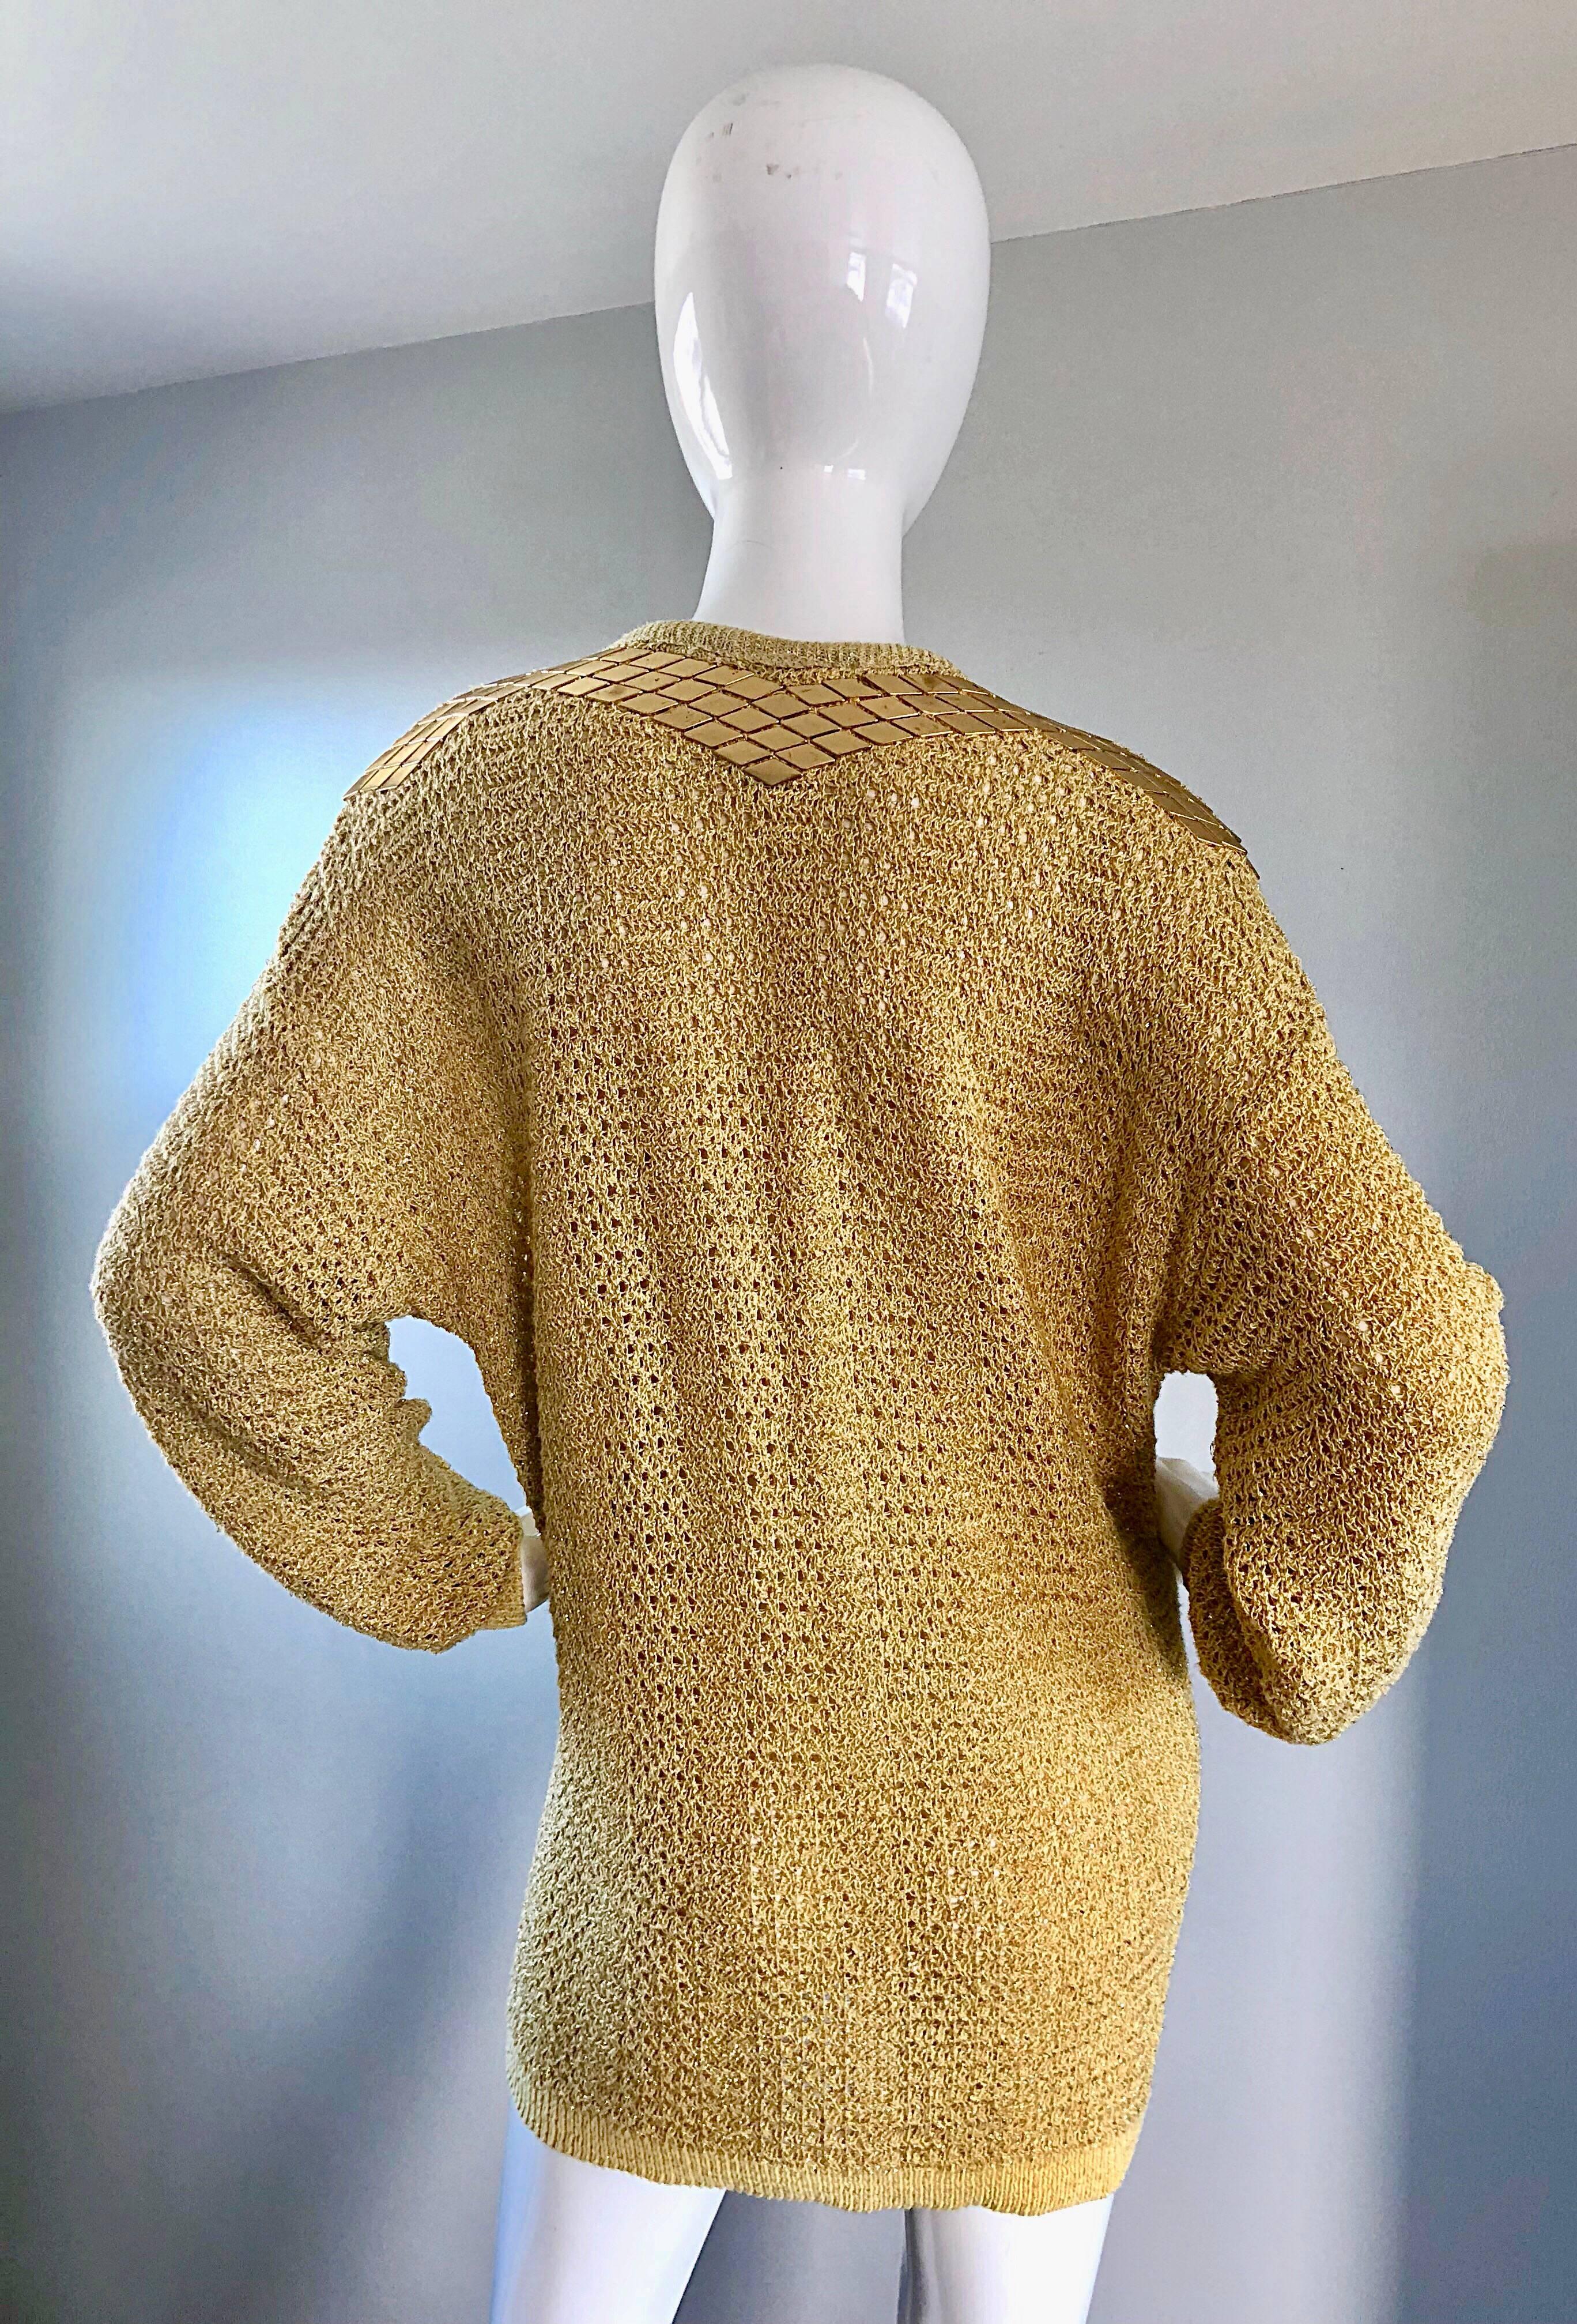 Marshall Rousso Vintage Gold Metallic Studded One Size Slouchy 1980s Sweater In Excellent Condition For Sale In San Diego, CA